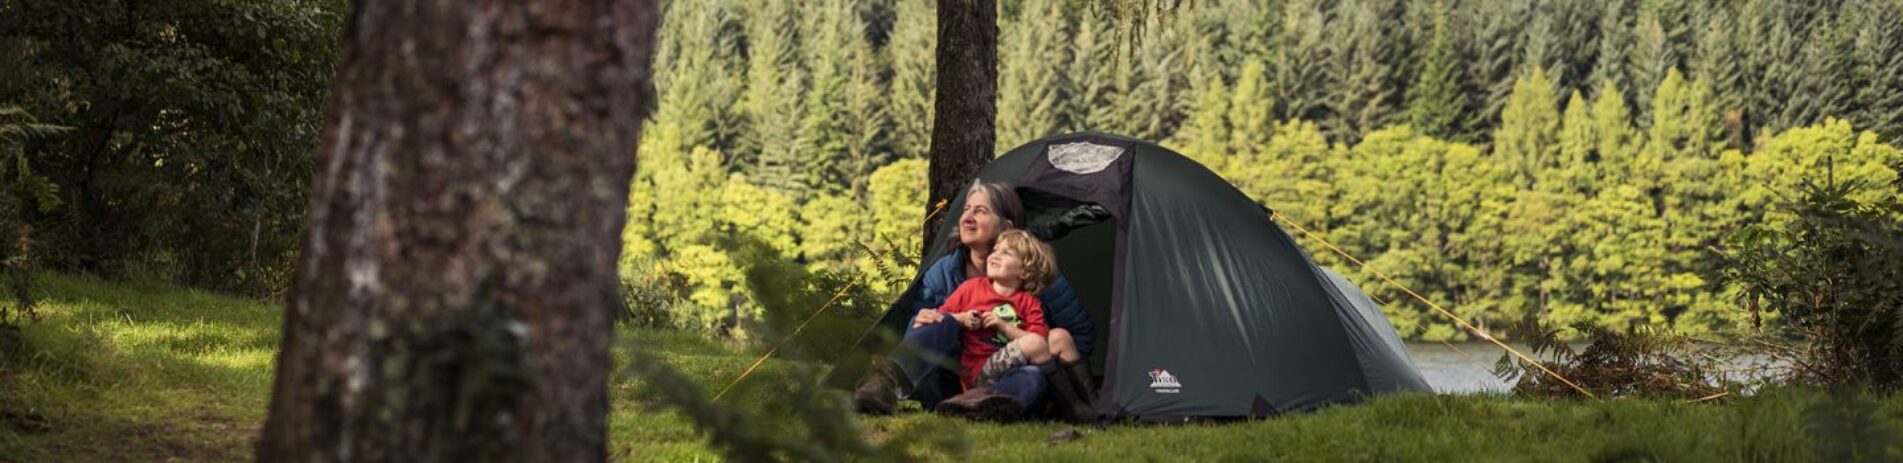 woman-holding-young-boy-at-tent-entrance-at-three-lochs-forest-drive